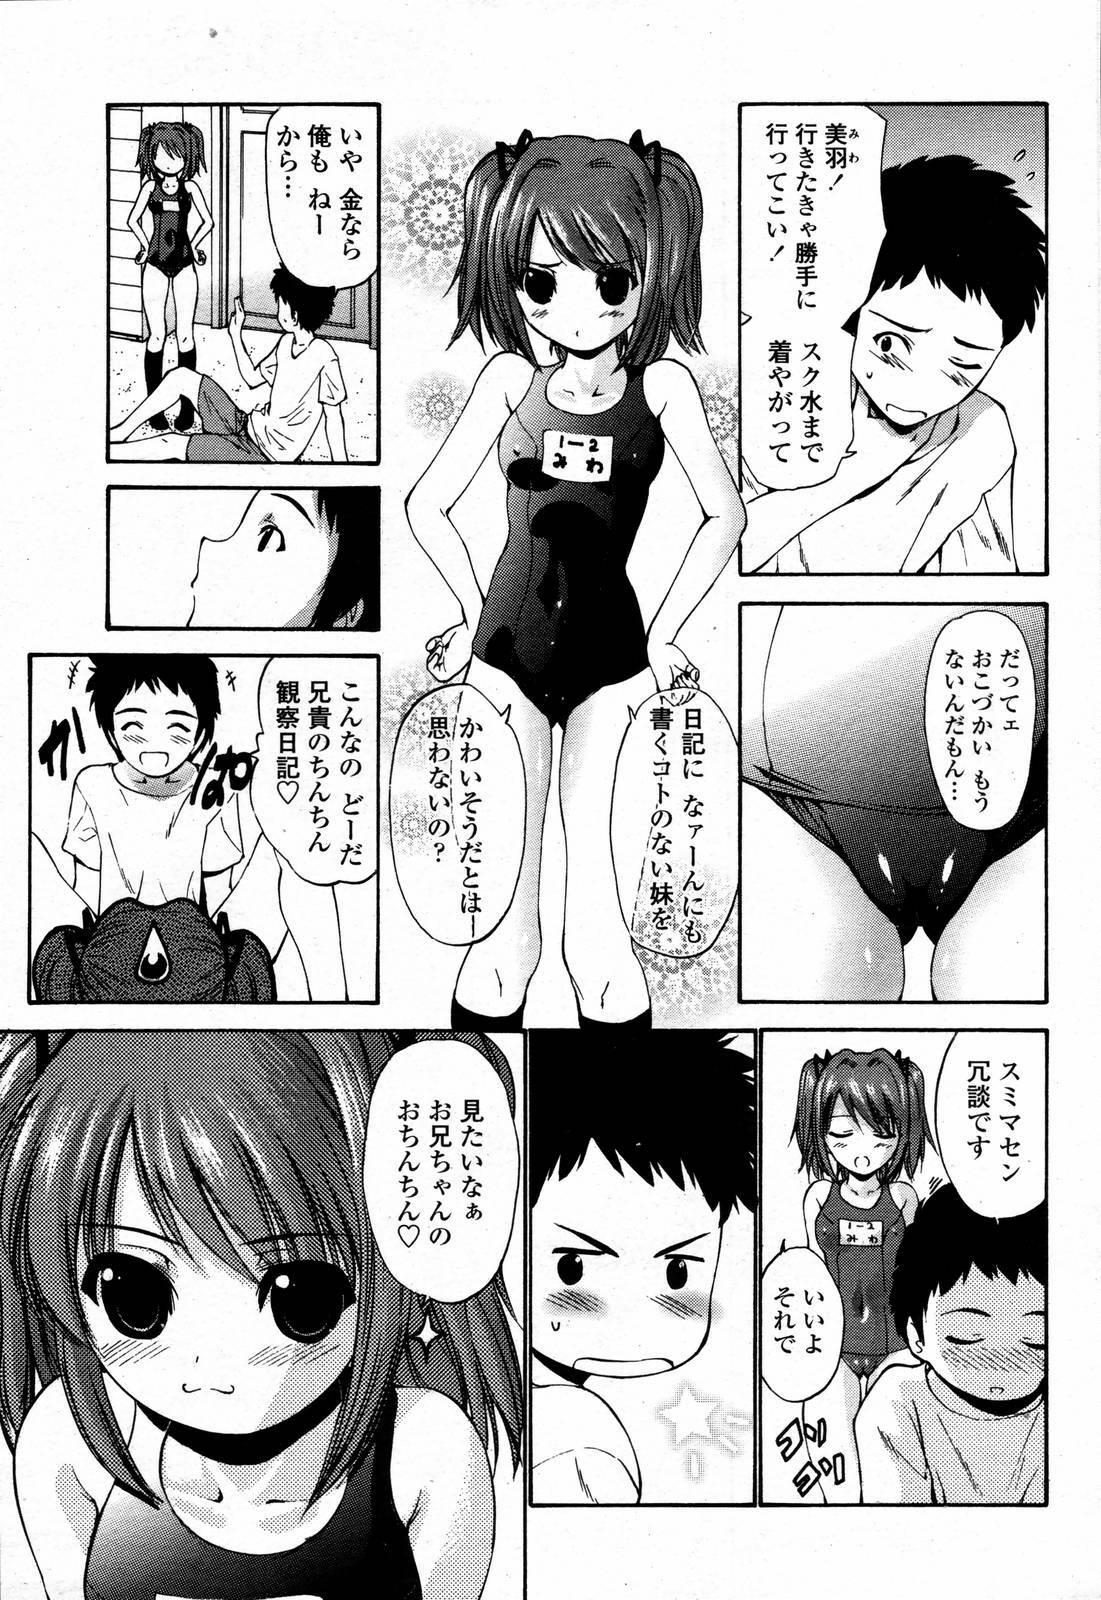 COMIC Momohime 2006-09 page 45 full